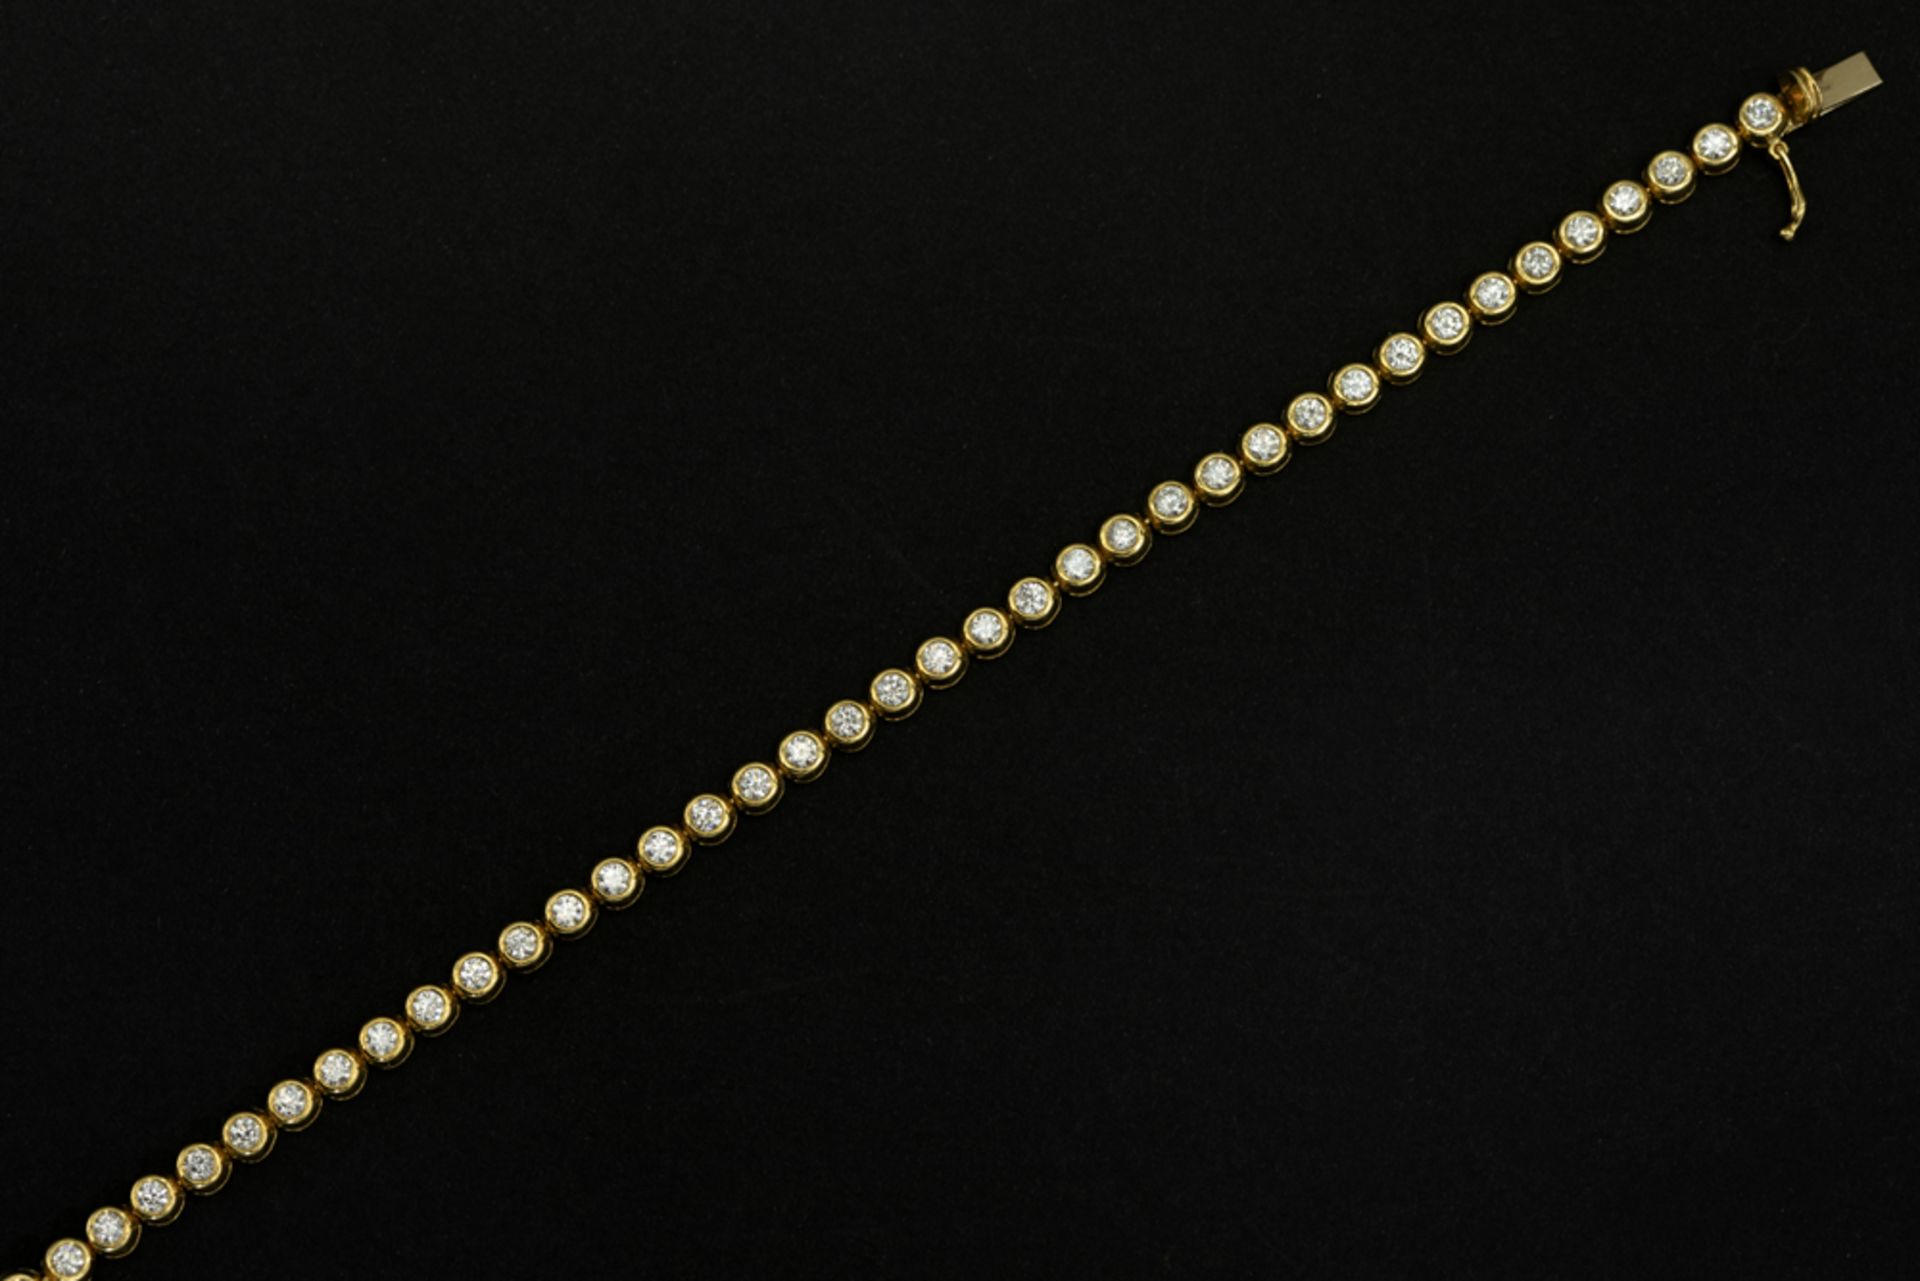 bracelet in yellow gold (18 carat) with more than 3 carat of high quality brilliant cut